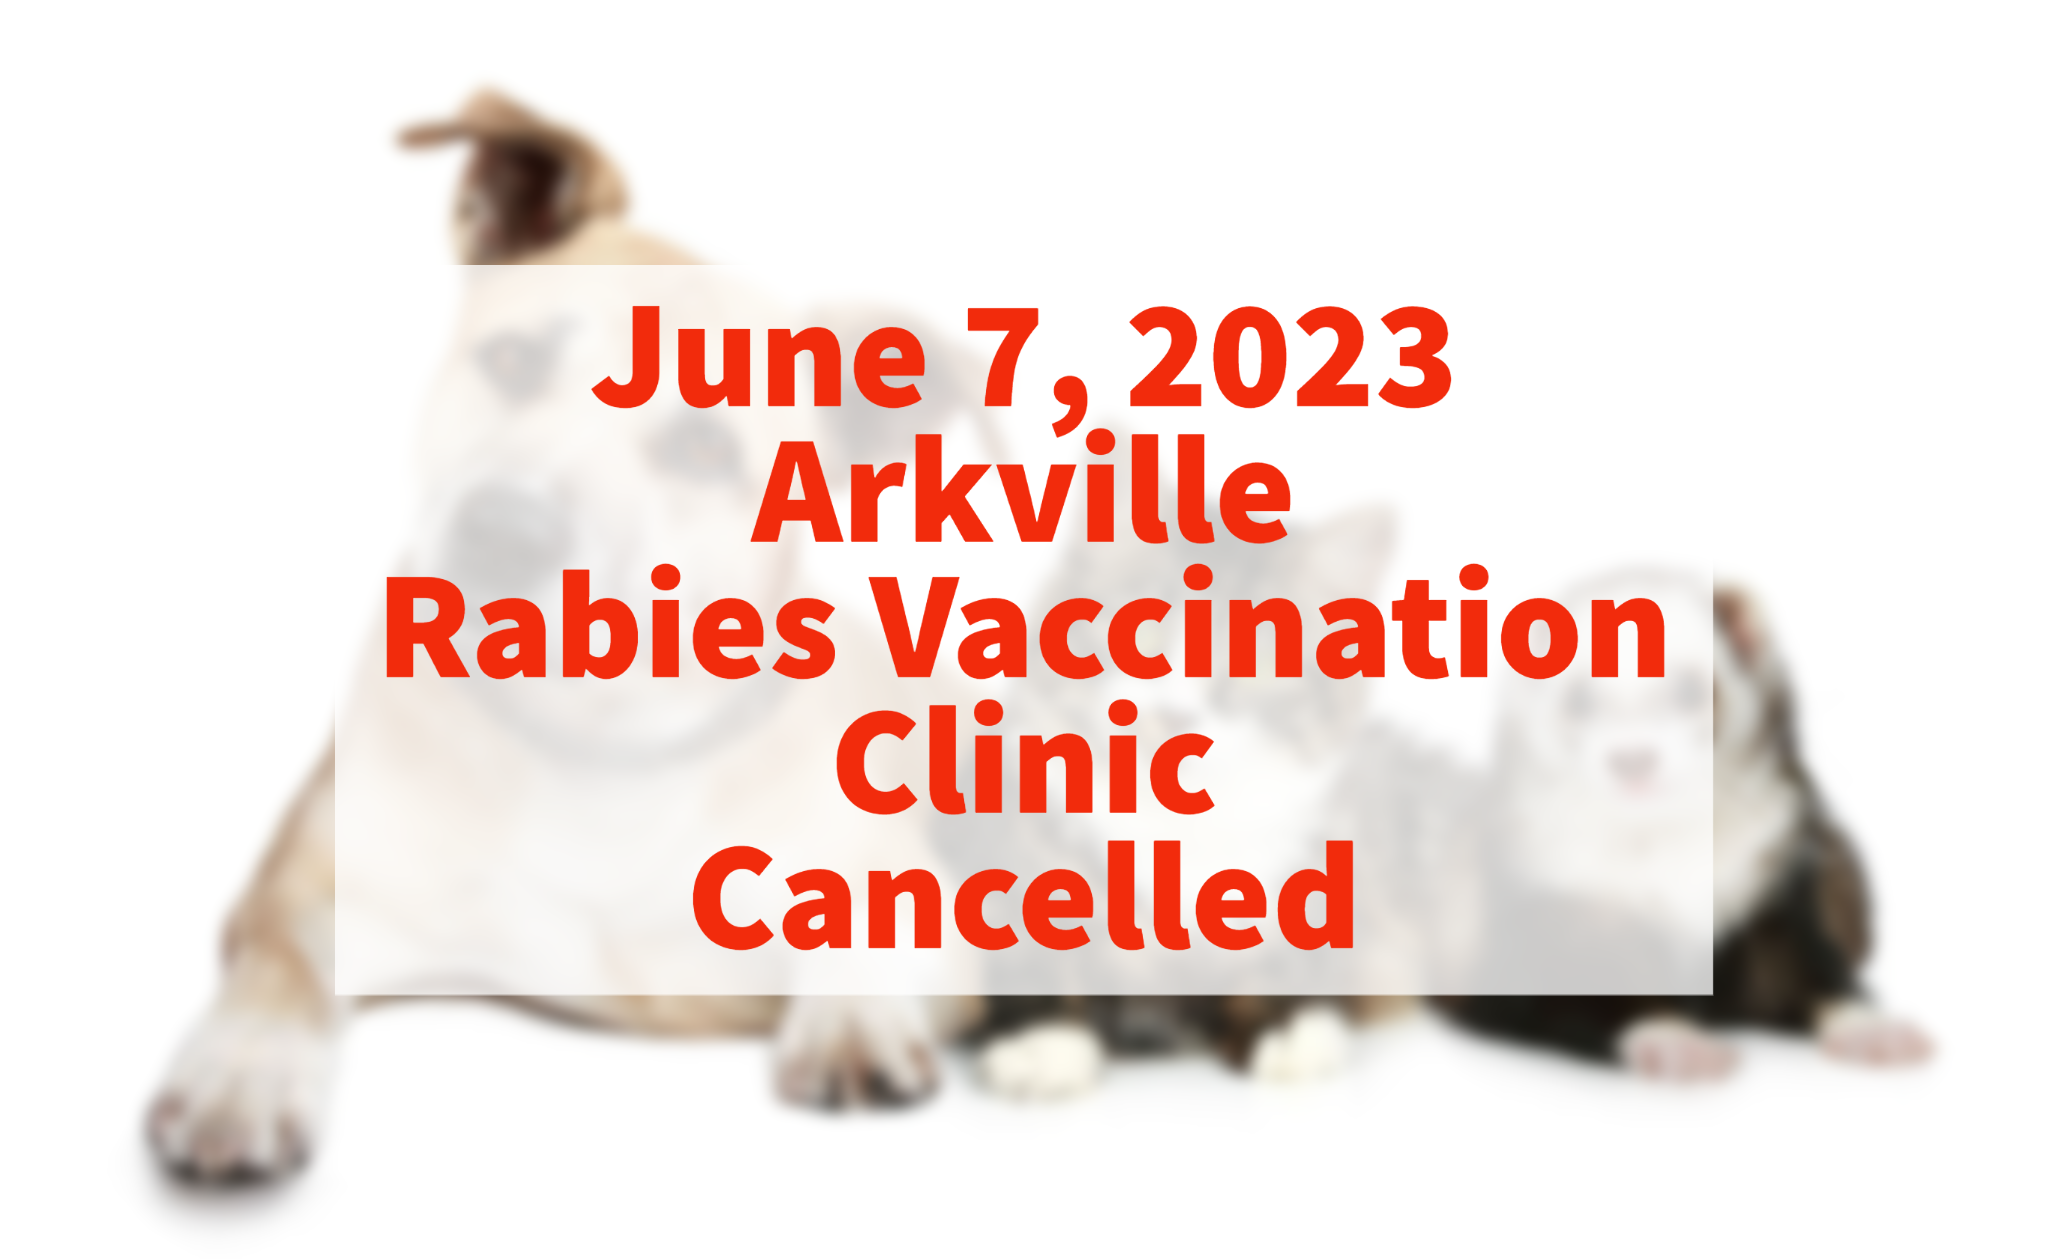 June 7, 2023 Arkville Rabies Vaccination Clinic Cancelled